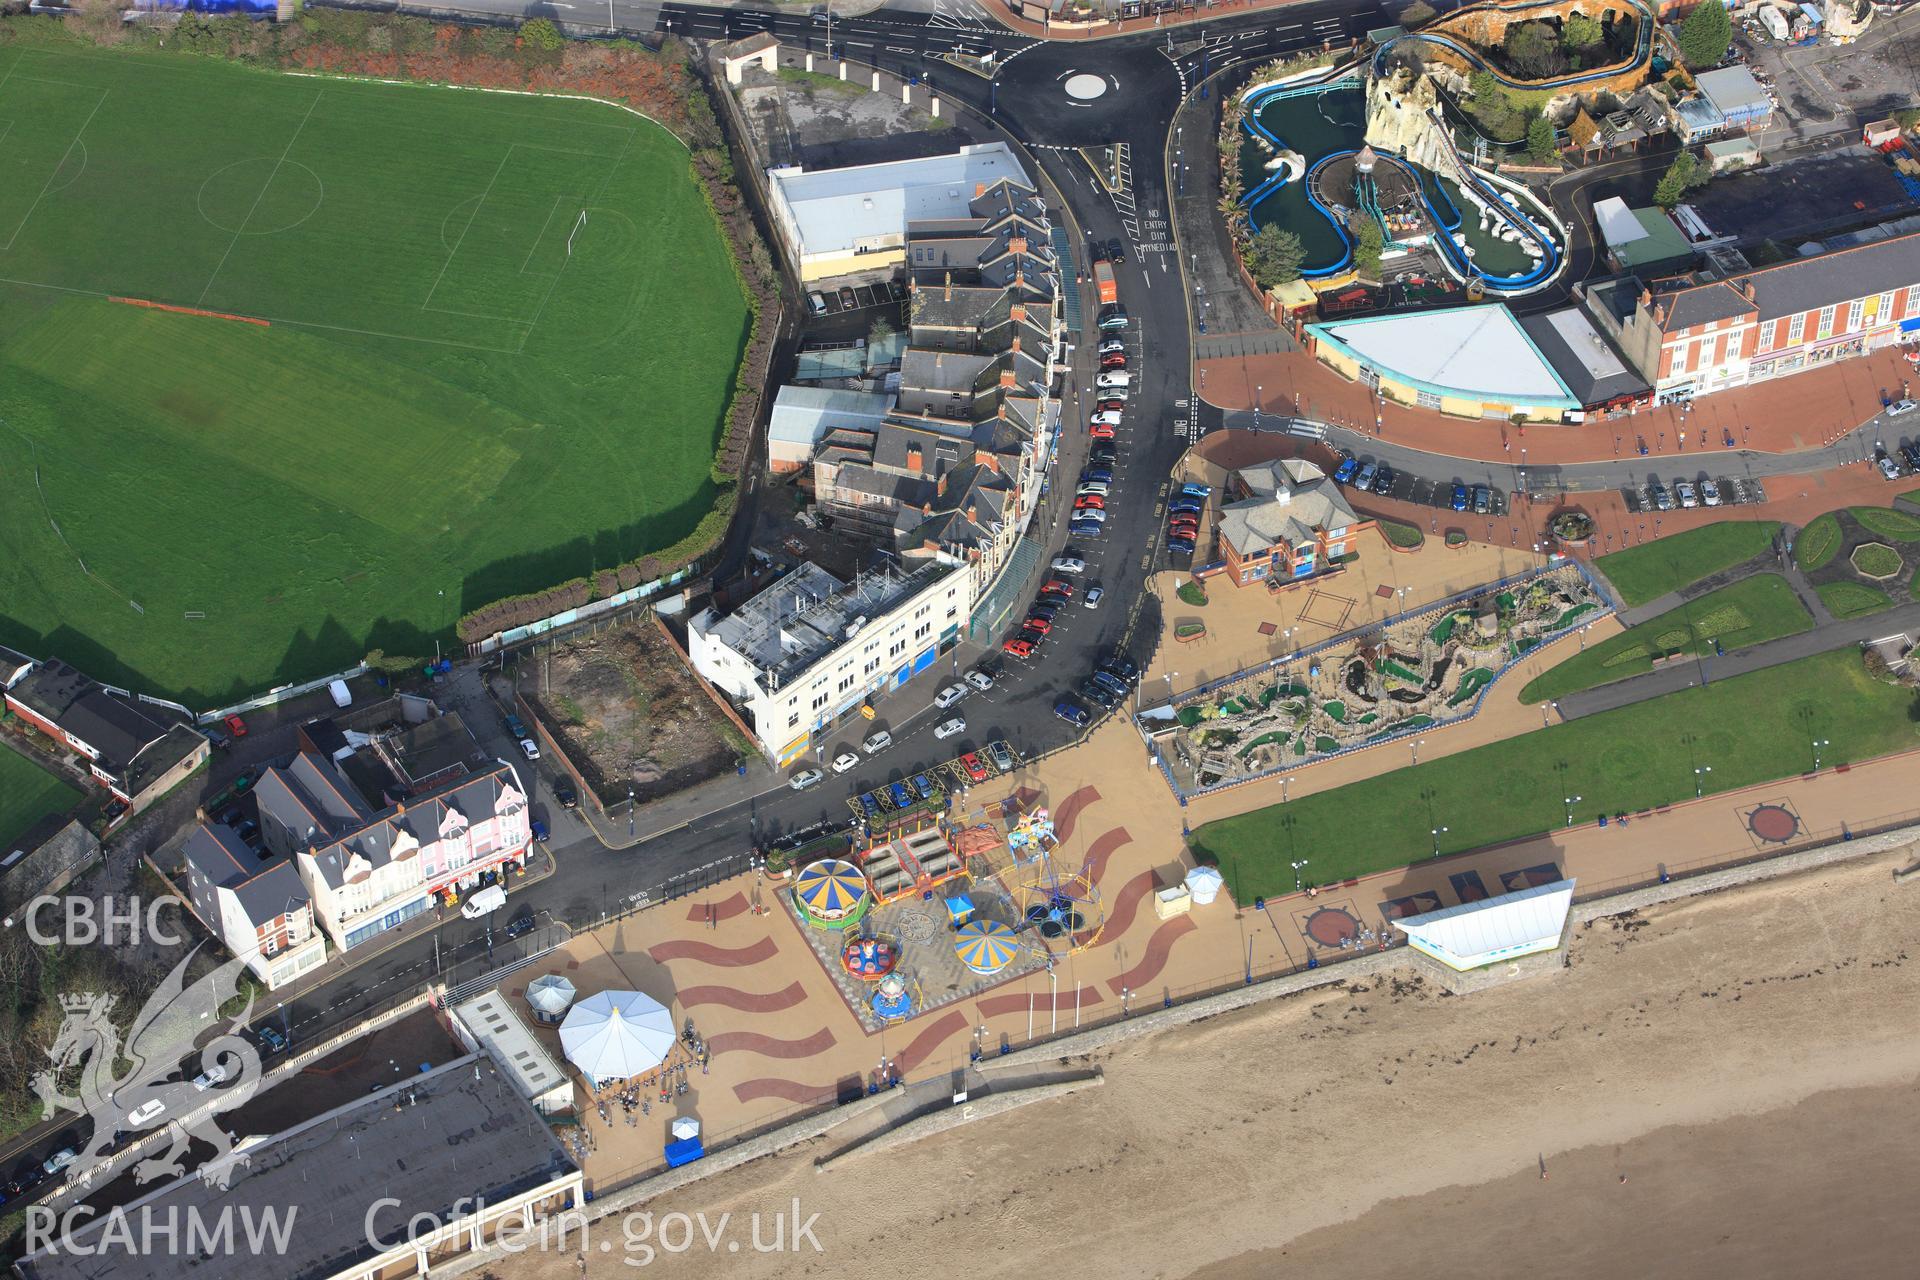 RCAHMW colour oblique photograph of Barry seafront, with the Promenade Cafe and seasonal funfair. Taken by Toby Driver on 17/11/2011.